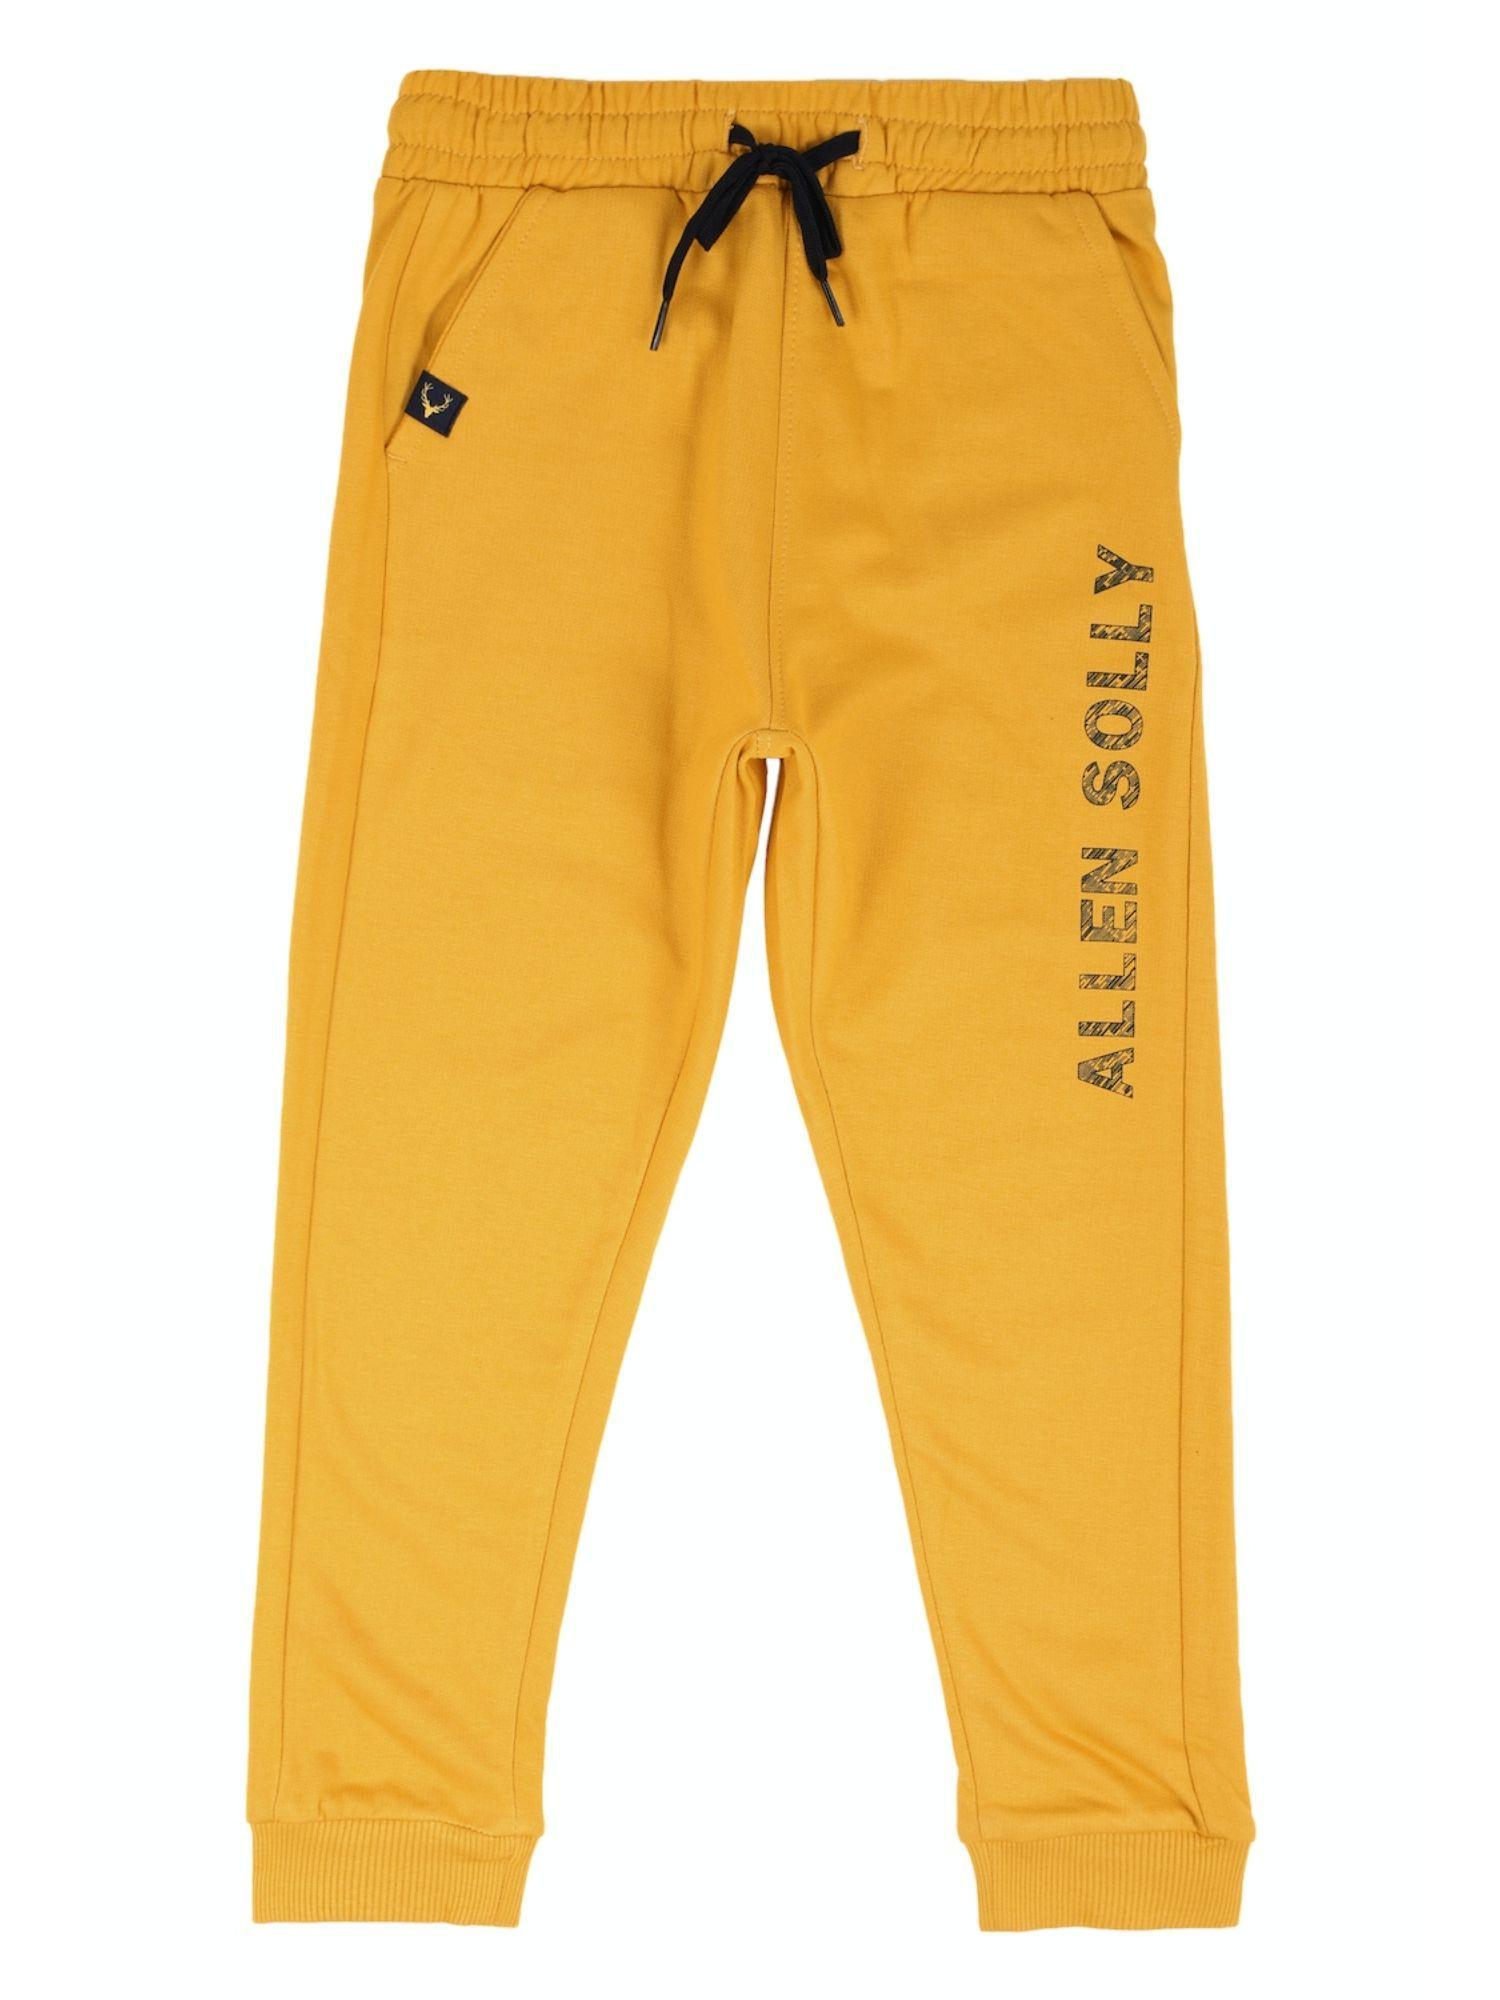 boys yellow regular fit solid track pants